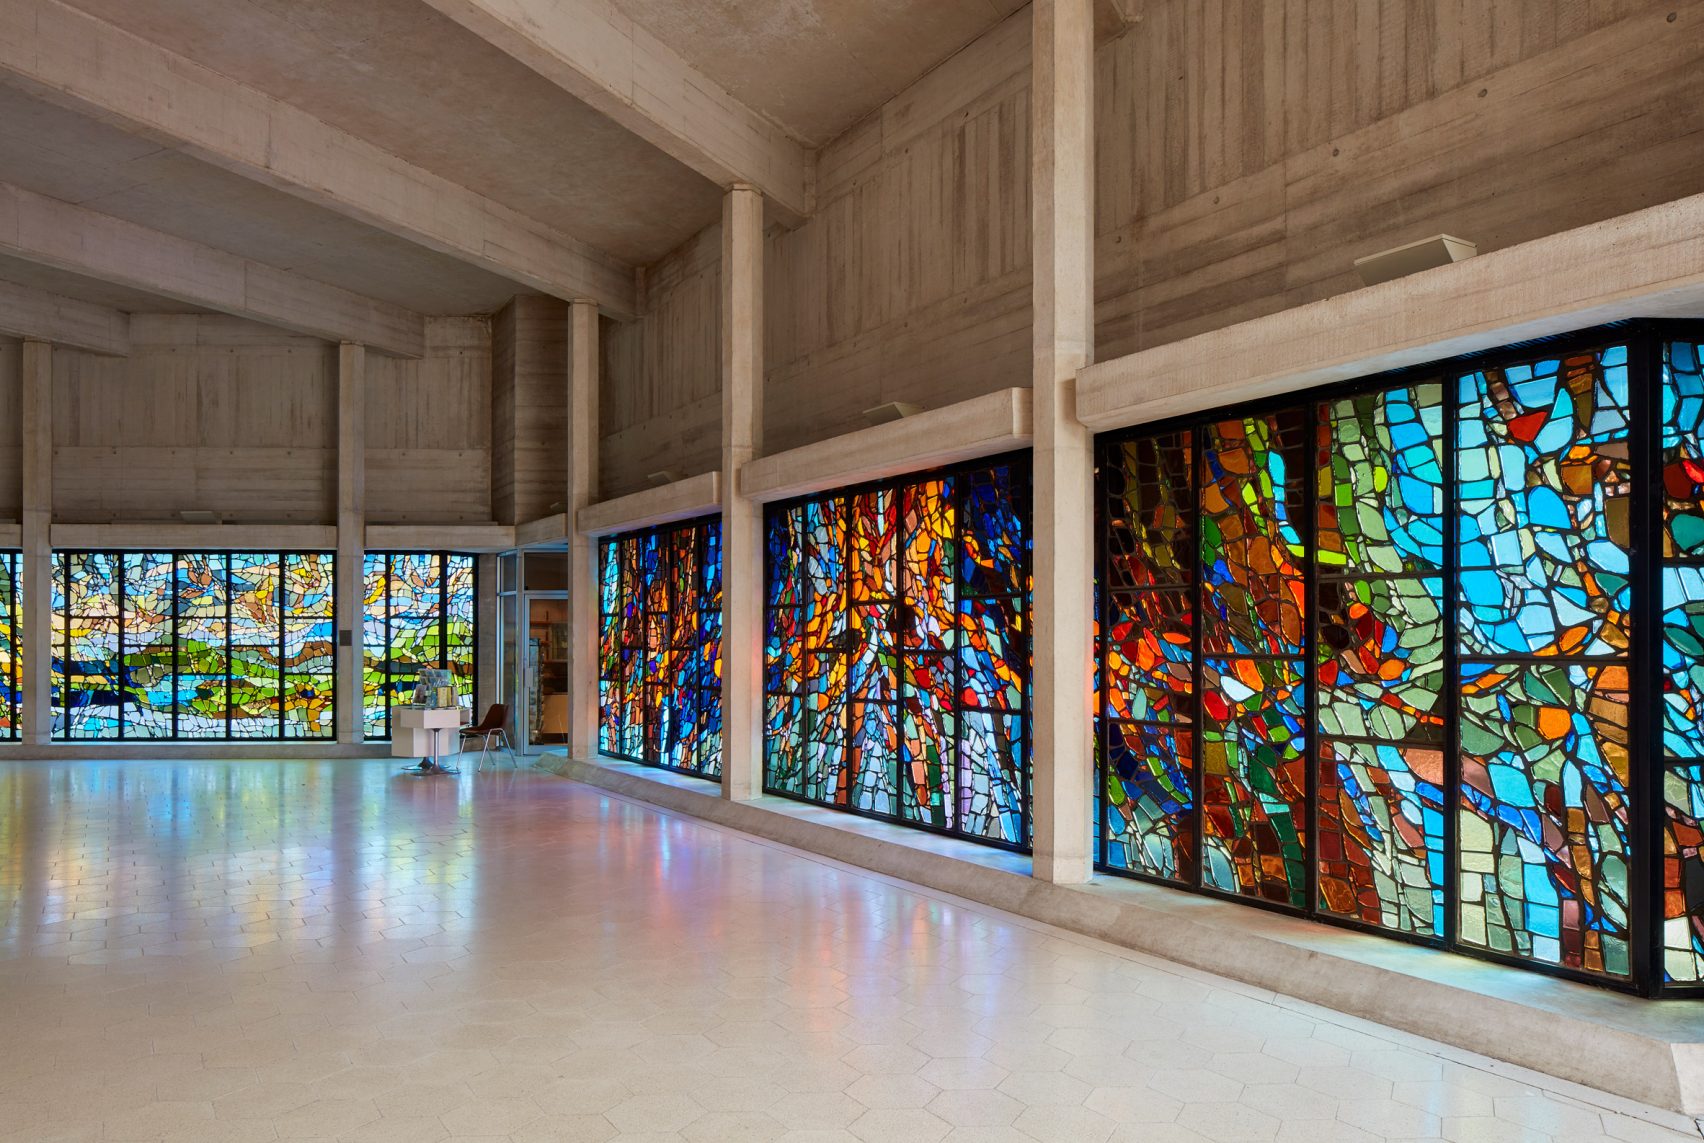 clifton-cathedral-refurbishment-purcell-bristol-architecture-photography-phil-boorman_dezeen_2364_col_13-1704x1143